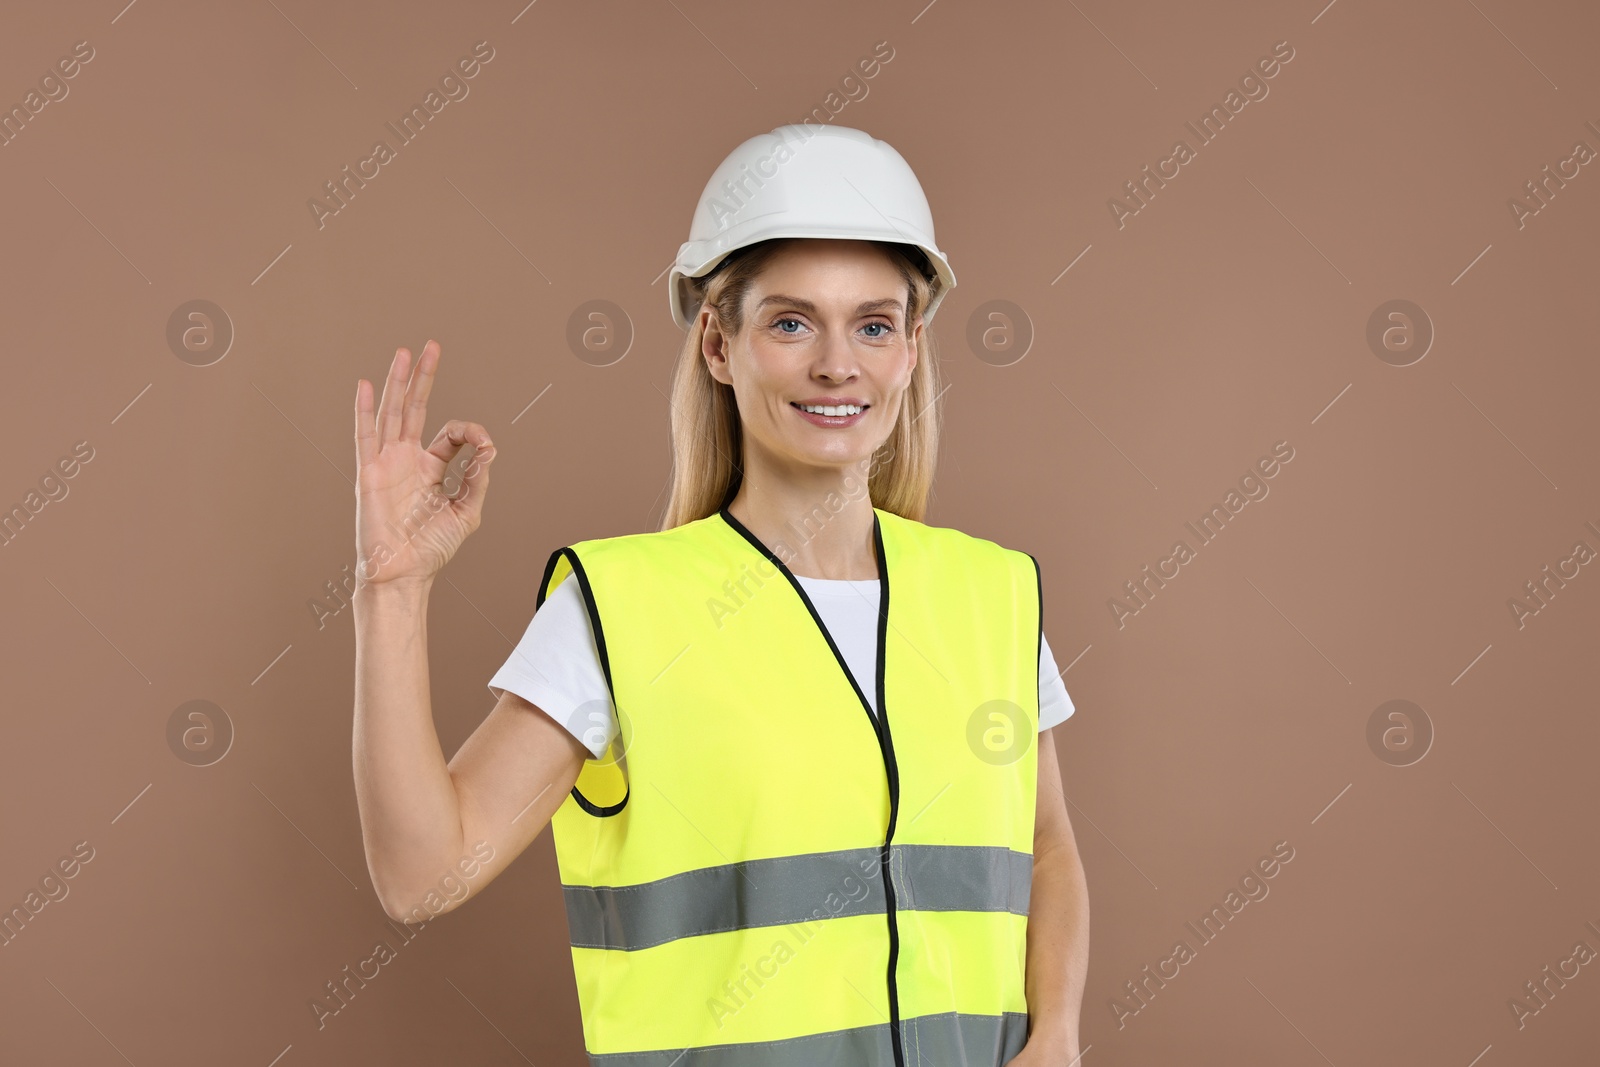 Photo of Engineer in hard hat on brown background